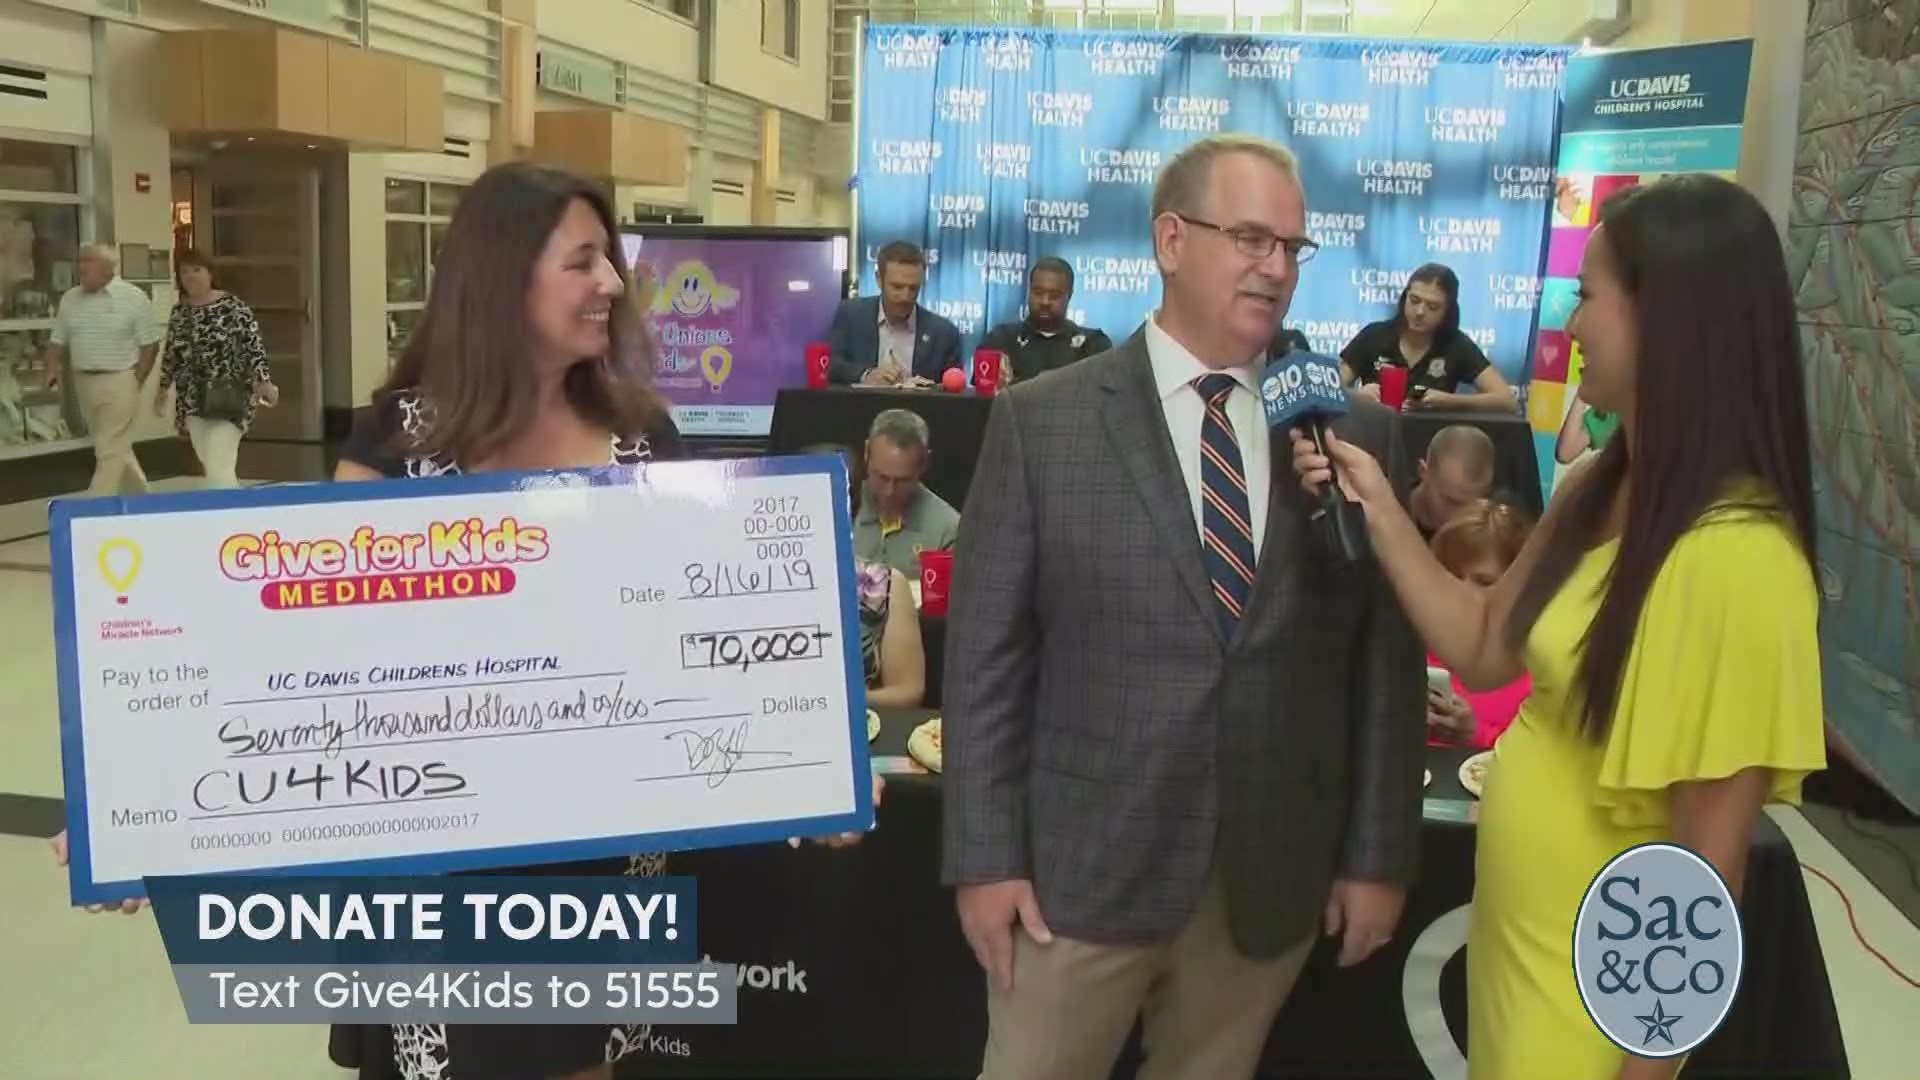 The Credit Union for Kids Wine Auction has made an incredible impact this year for the CMN local hospitals! The following is a paid segment sponsored by UC Davis Children’s Hospital.